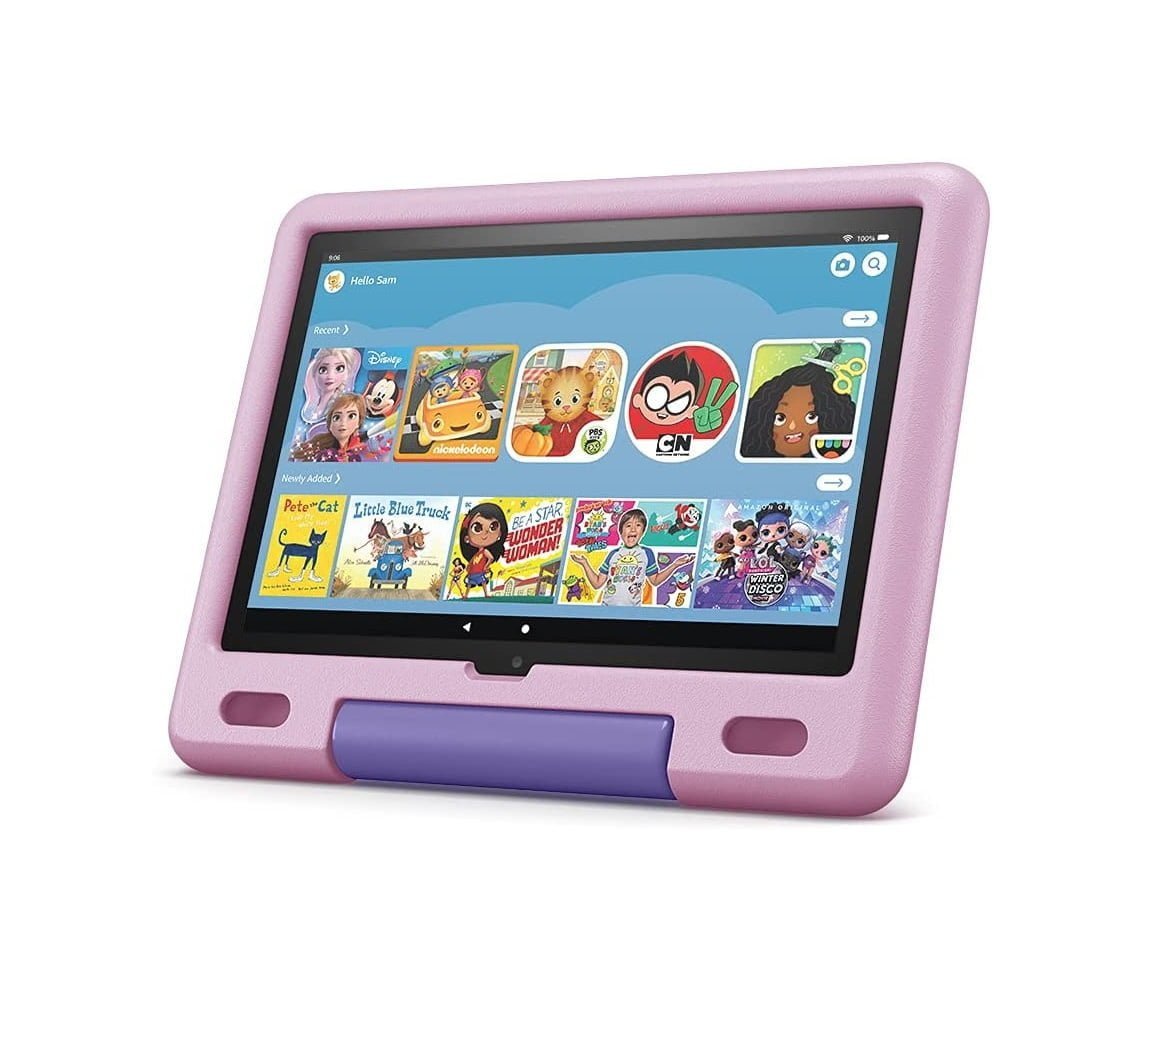 61Sglezvkps. Ac Sl1000 Amazon &Amp;Lt;H1&Amp;Gt;Amazon Fire Hd 10 Kids Tablet, 10.1&Amp;Quot; 11Th Generation, 1080P Full Hd, Ages 3–7, 32 Gb,&Amp;Lt;/H1&Amp;Gt; &Amp;Lt;H1 Id=&Amp;Quot;Title&Amp;Quot; Class=&Amp;Quot;A-Size-Large A-Spacing-None&Amp;Quot;&Amp;Gt;&Amp;Lt;Span Id=&Amp;Quot;Producttitle&Amp;Quot; Class=&Amp;Quot;A-Size-Large Product-Title-Word-Break&Amp;Quot;&Amp;Gt;Lavender&Amp;Lt;/Span&Amp;Gt;&Amp;Lt;/H1&Amp;Gt; &Amp;Lt;Ul&Amp;Gt; &Amp;Lt;Li&Amp;Gt;&Amp;Lt;Span Class=&Amp;Quot;A-List-Item&Amp;Quot;&Amp;Gt;Easy-To-Use Parental Controls Allow You To Filter Content And Set Educational Goals And Time Limits. &Amp;Lt;/Span&Amp;Gt;&Amp;Lt;/Li&Amp;Gt; &Amp;Lt;Li&Amp;Gt;&Amp;Lt;Span Class=&Amp;Quot;A-List-Item&Amp;Quot;&Amp;Gt; Parents Can Give Kids Access To More Apps Like Netflix, Disney+, And Zoom Via The Amazon Parent Dashboard. &Amp;Lt;/Span&Amp;Gt;&Amp;Lt;/Li&Amp;Gt; &Amp;Lt;Li&Amp;Gt;&Amp;Lt;Span Class=&Amp;Quot;A-List-Item&Amp;Quot;&Amp;Gt; Features An Octa-Core Processor, 3 Gb Ram, 10.1&Amp;Quot; 1080P Full Hd Display, Dual Cameras, Usb-C (2.0) Port, And Up To 1 Tb Of Expandable Storage. Screen Made With Strengthened Aluminosilicate Glass. &Amp;Lt;/Span&Amp;Gt;&Amp;Lt;/Li&Amp;Gt; &Amp;Lt;Li&Amp;Gt;&Amp;Lt;Span Class=&Amp;Quot;A-List-Item&Amp;Quot;&Amp;Gt; Features A Usb-C (2.0) Port And Includes A Usb-C Cable And 9W Power Adapter In The Box.&Amp;Lt;/Span&Amp;Gt;&Amp;Lt;/Li&Amp;Gt; &Amp;Lt;/Ul&Amp;Gt; &Amp;Lt;H2&Amp;Gt;Included In The Box&Amp;Lt;/H2&Amp;Gt; Fire Hd 10 Tablet (11Th Gen), Amazon Kid-Proof Case With Stand/Handle, Amazon Power Adapter, Usb-C (2.0) Charging Cable, Built-In Rechargeable Battery. Amazon Fire Hd 10 Amazon Fire Hd 10 Kids Tablet, 10.1&Amp;Quot; 11Th Generation, 1080P Full Hd, Ages 3–7, 32 Gb, Lavender